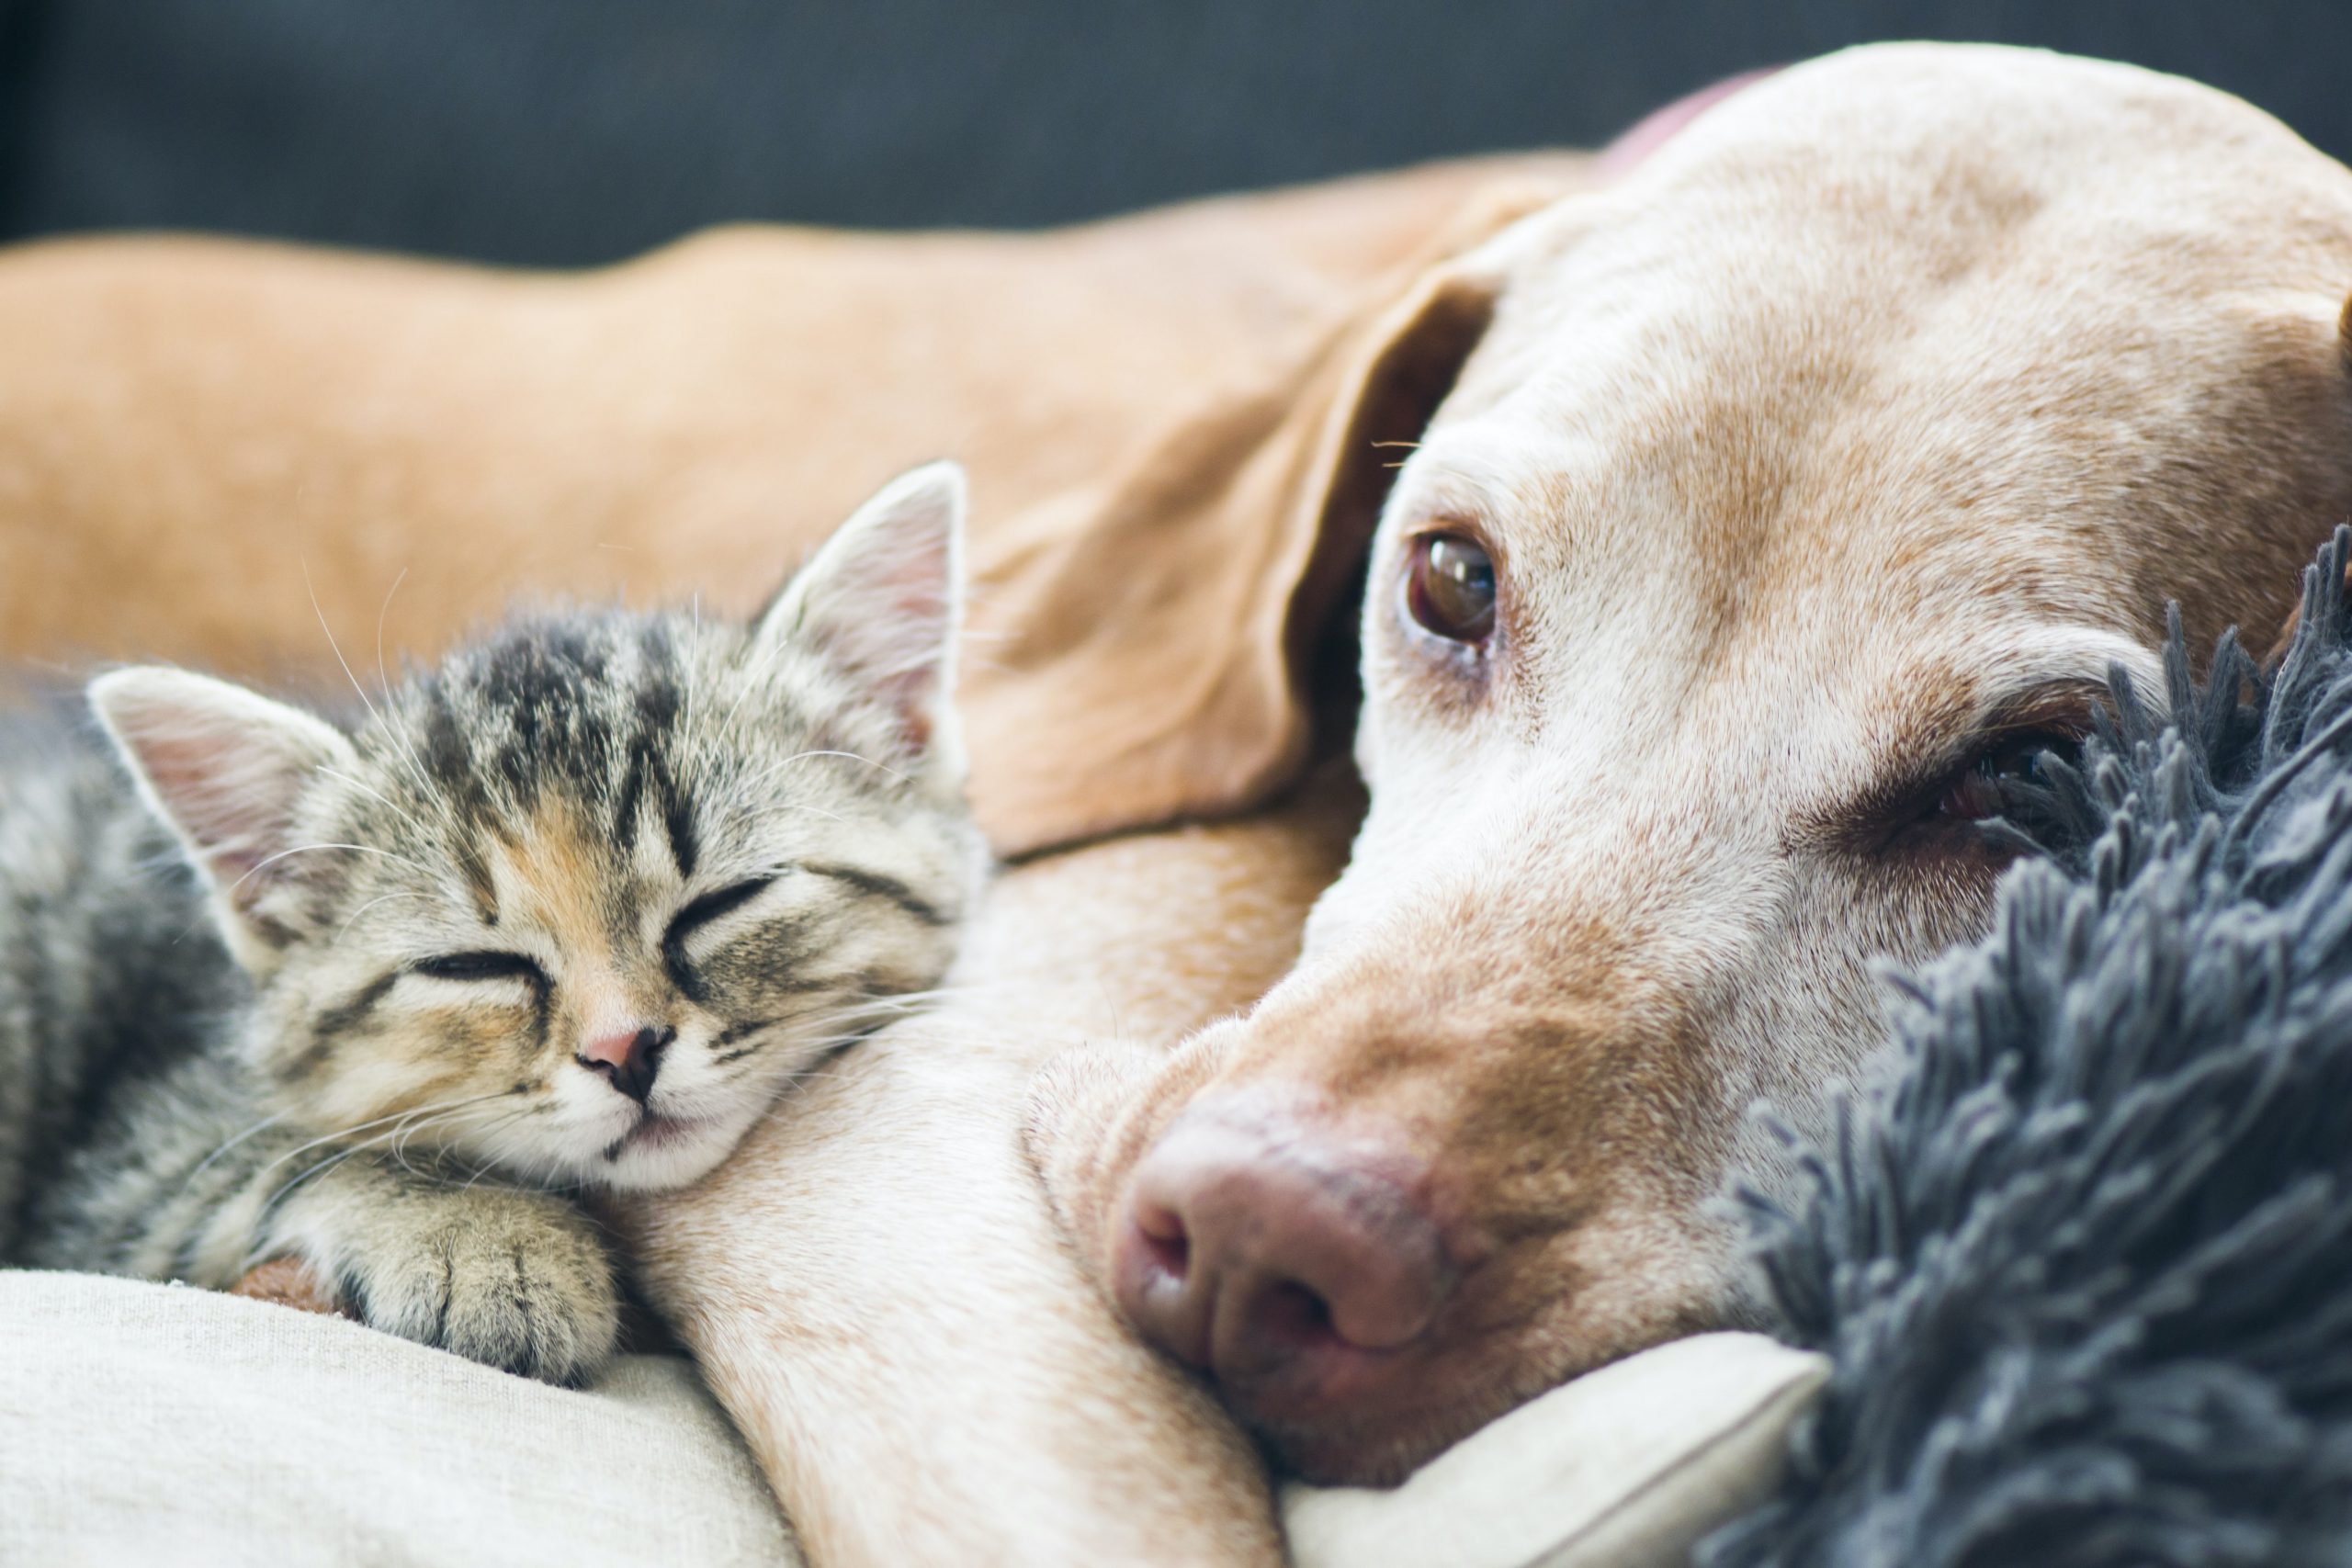 Pet research: 18 new insights about your furry friends.